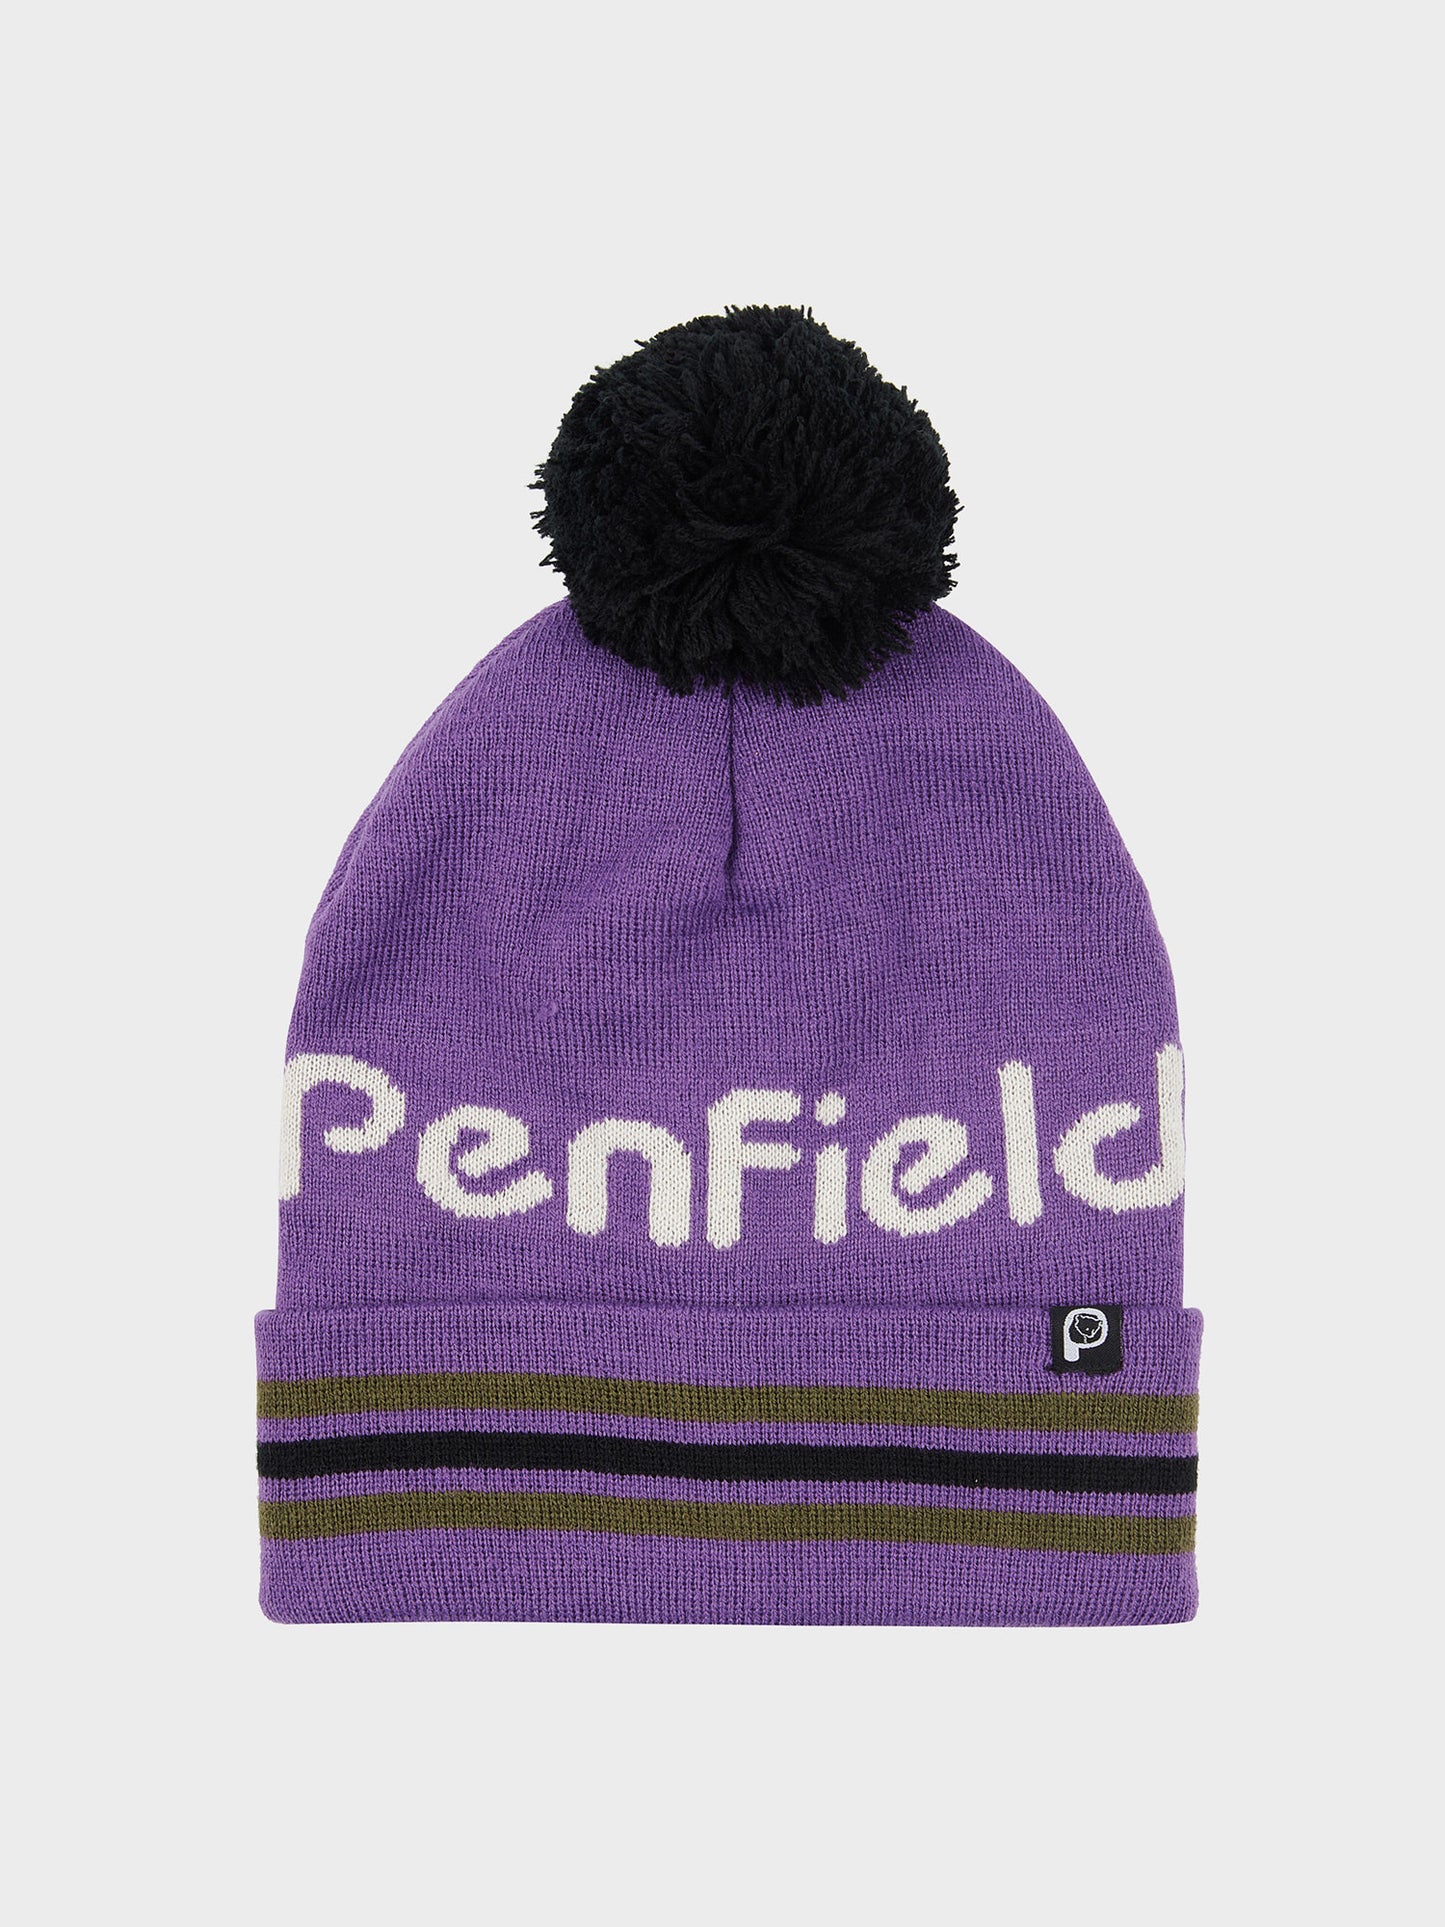 Intarsia Knit Bobble Beanie in Pansy